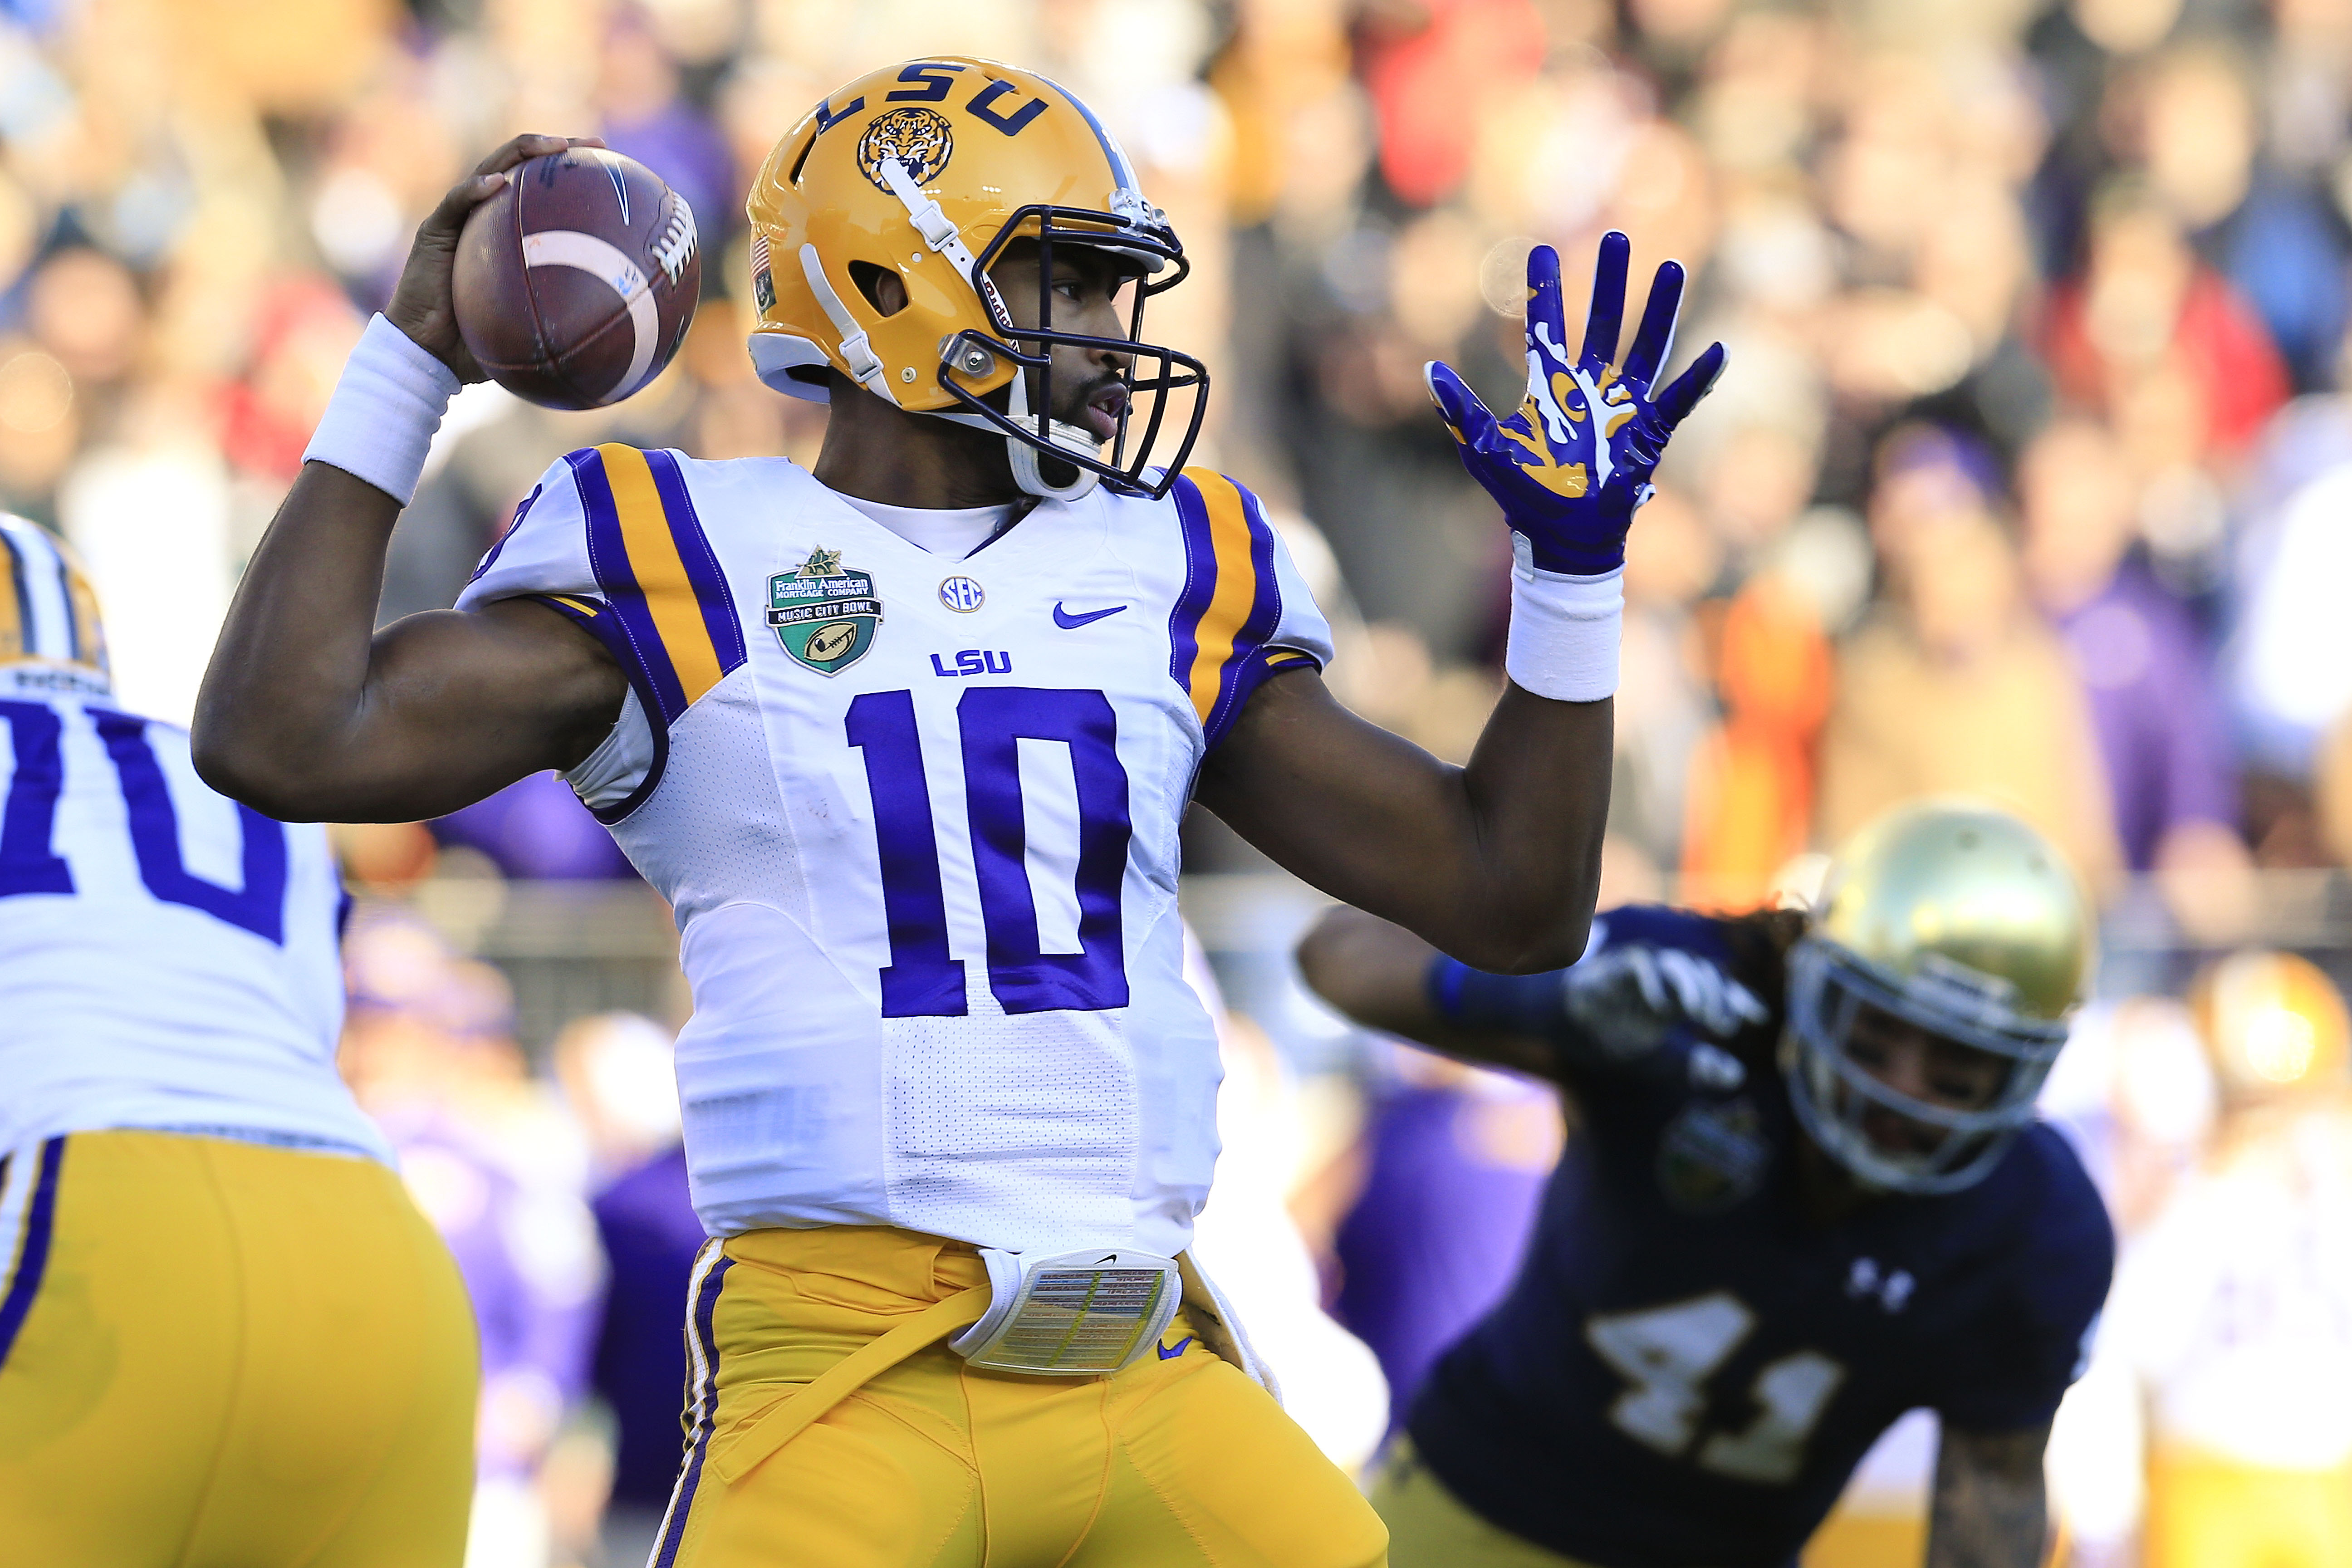 LSU quarterback Anthony Jennings (10) passes against Notre Dame in the first half of the Music City Bowl NCAA college football game Tuesday, Dec. 30, 2014, in Nashville, Tenn. (AP Photo/Mark Humphrey)